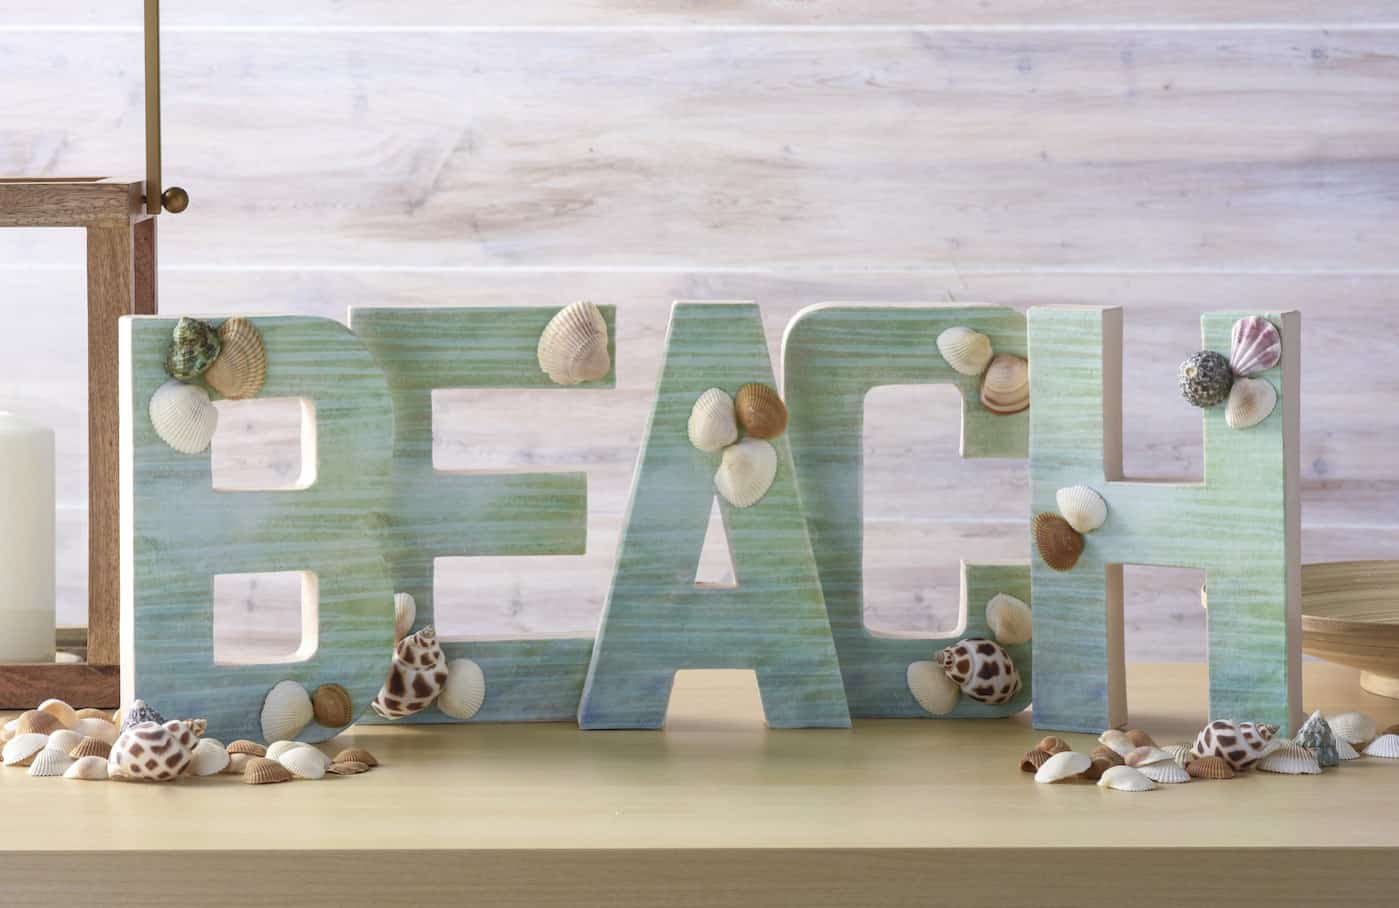 Make a fun project for summer! This DIY letter beach craft would look perfect on your mantel - and it